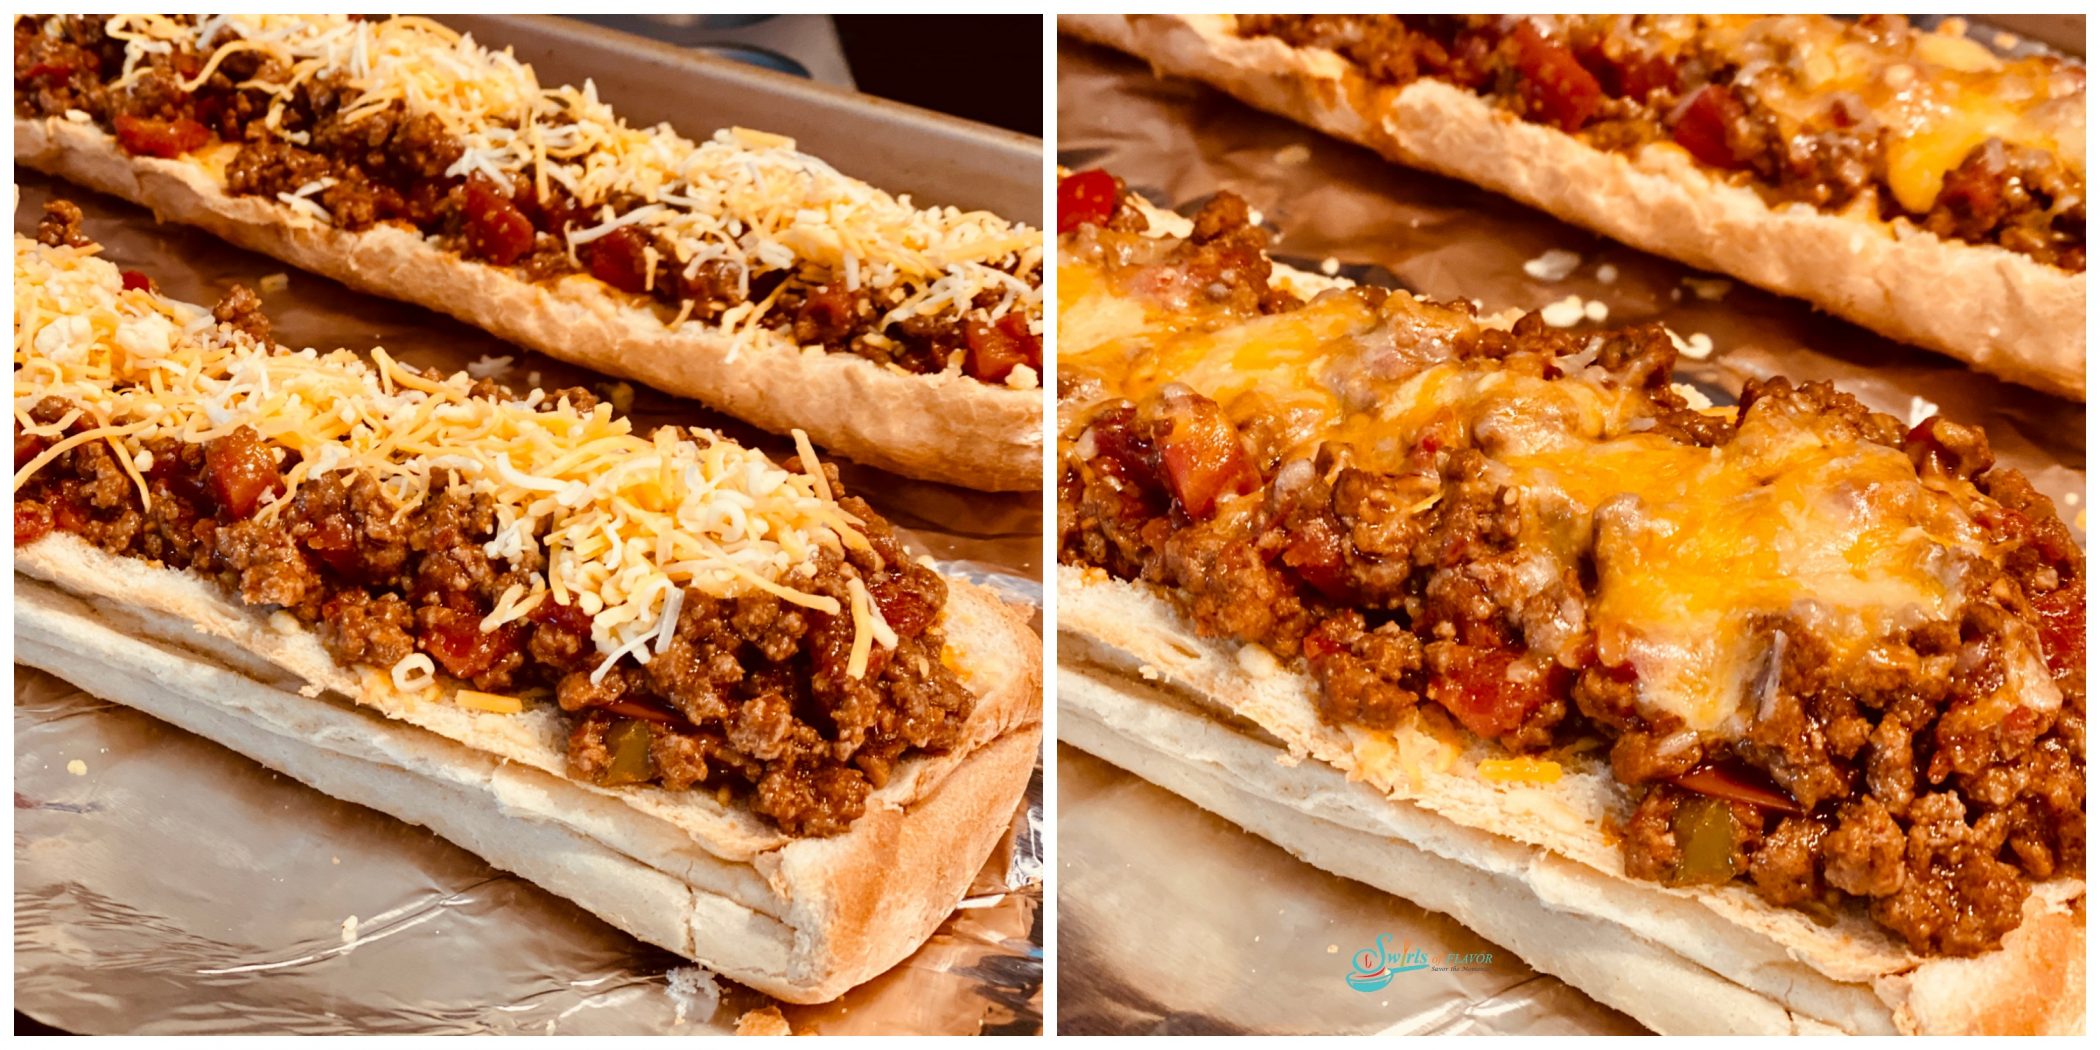 Taco bread sprinkled with cheese and then baked with melted cheese